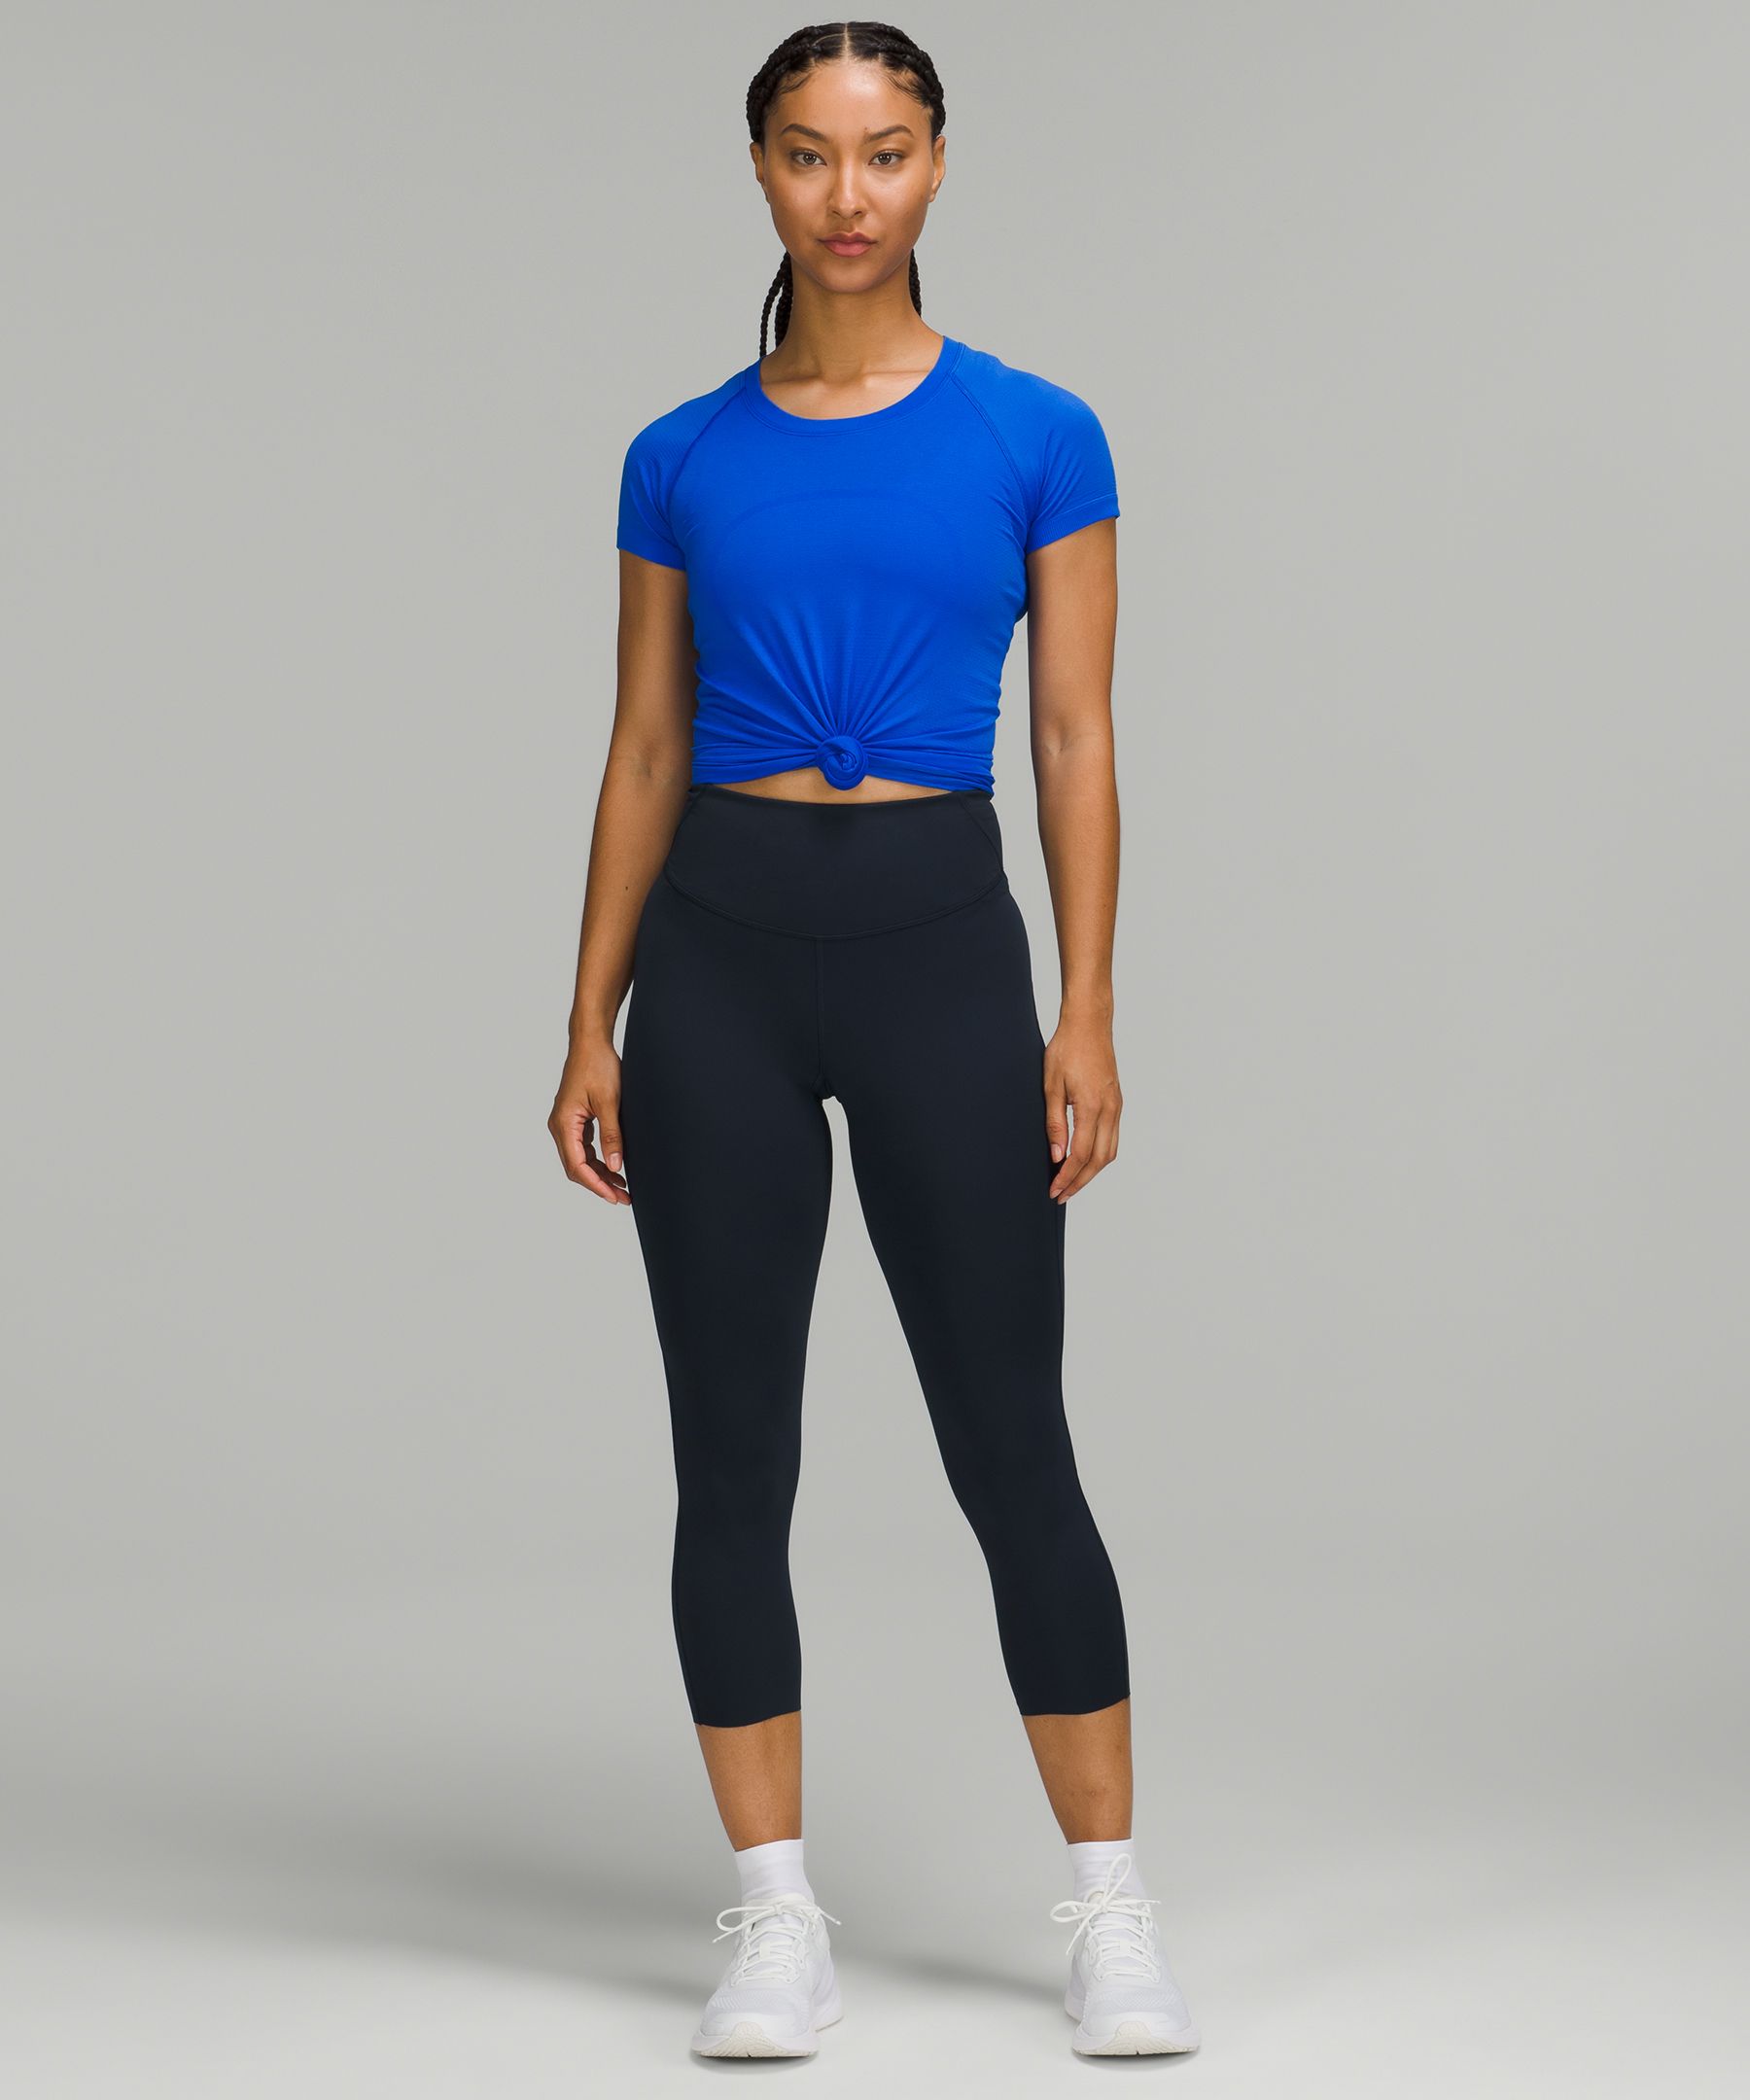 Lululemon Base Pace Tights Review